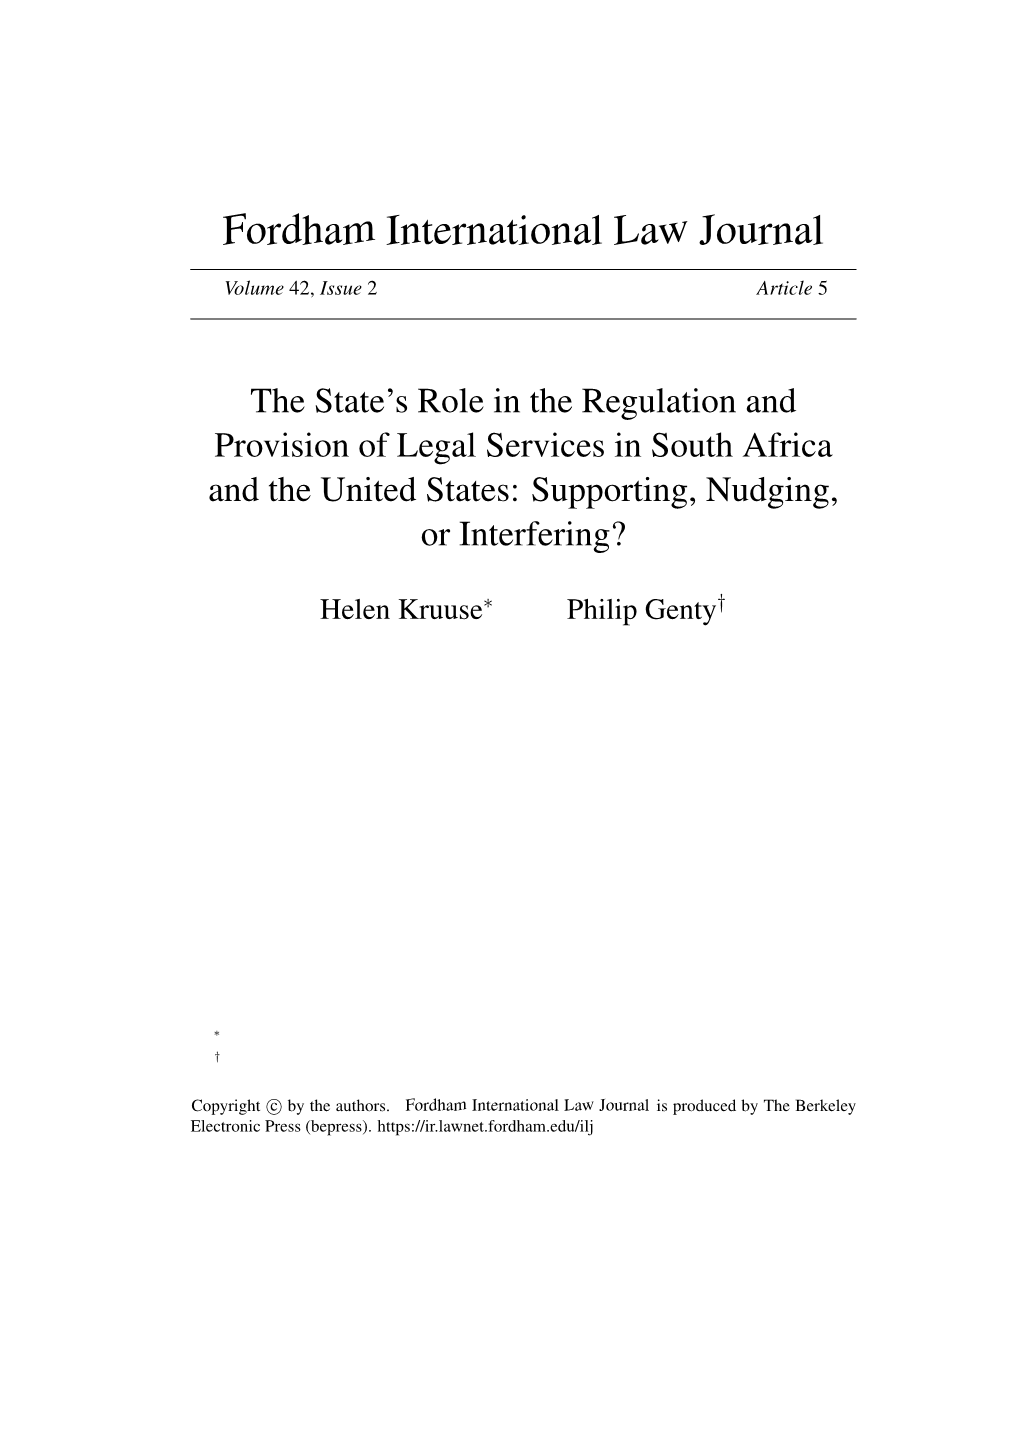 The State's Role in the Regulation and Provision of Legal Services In